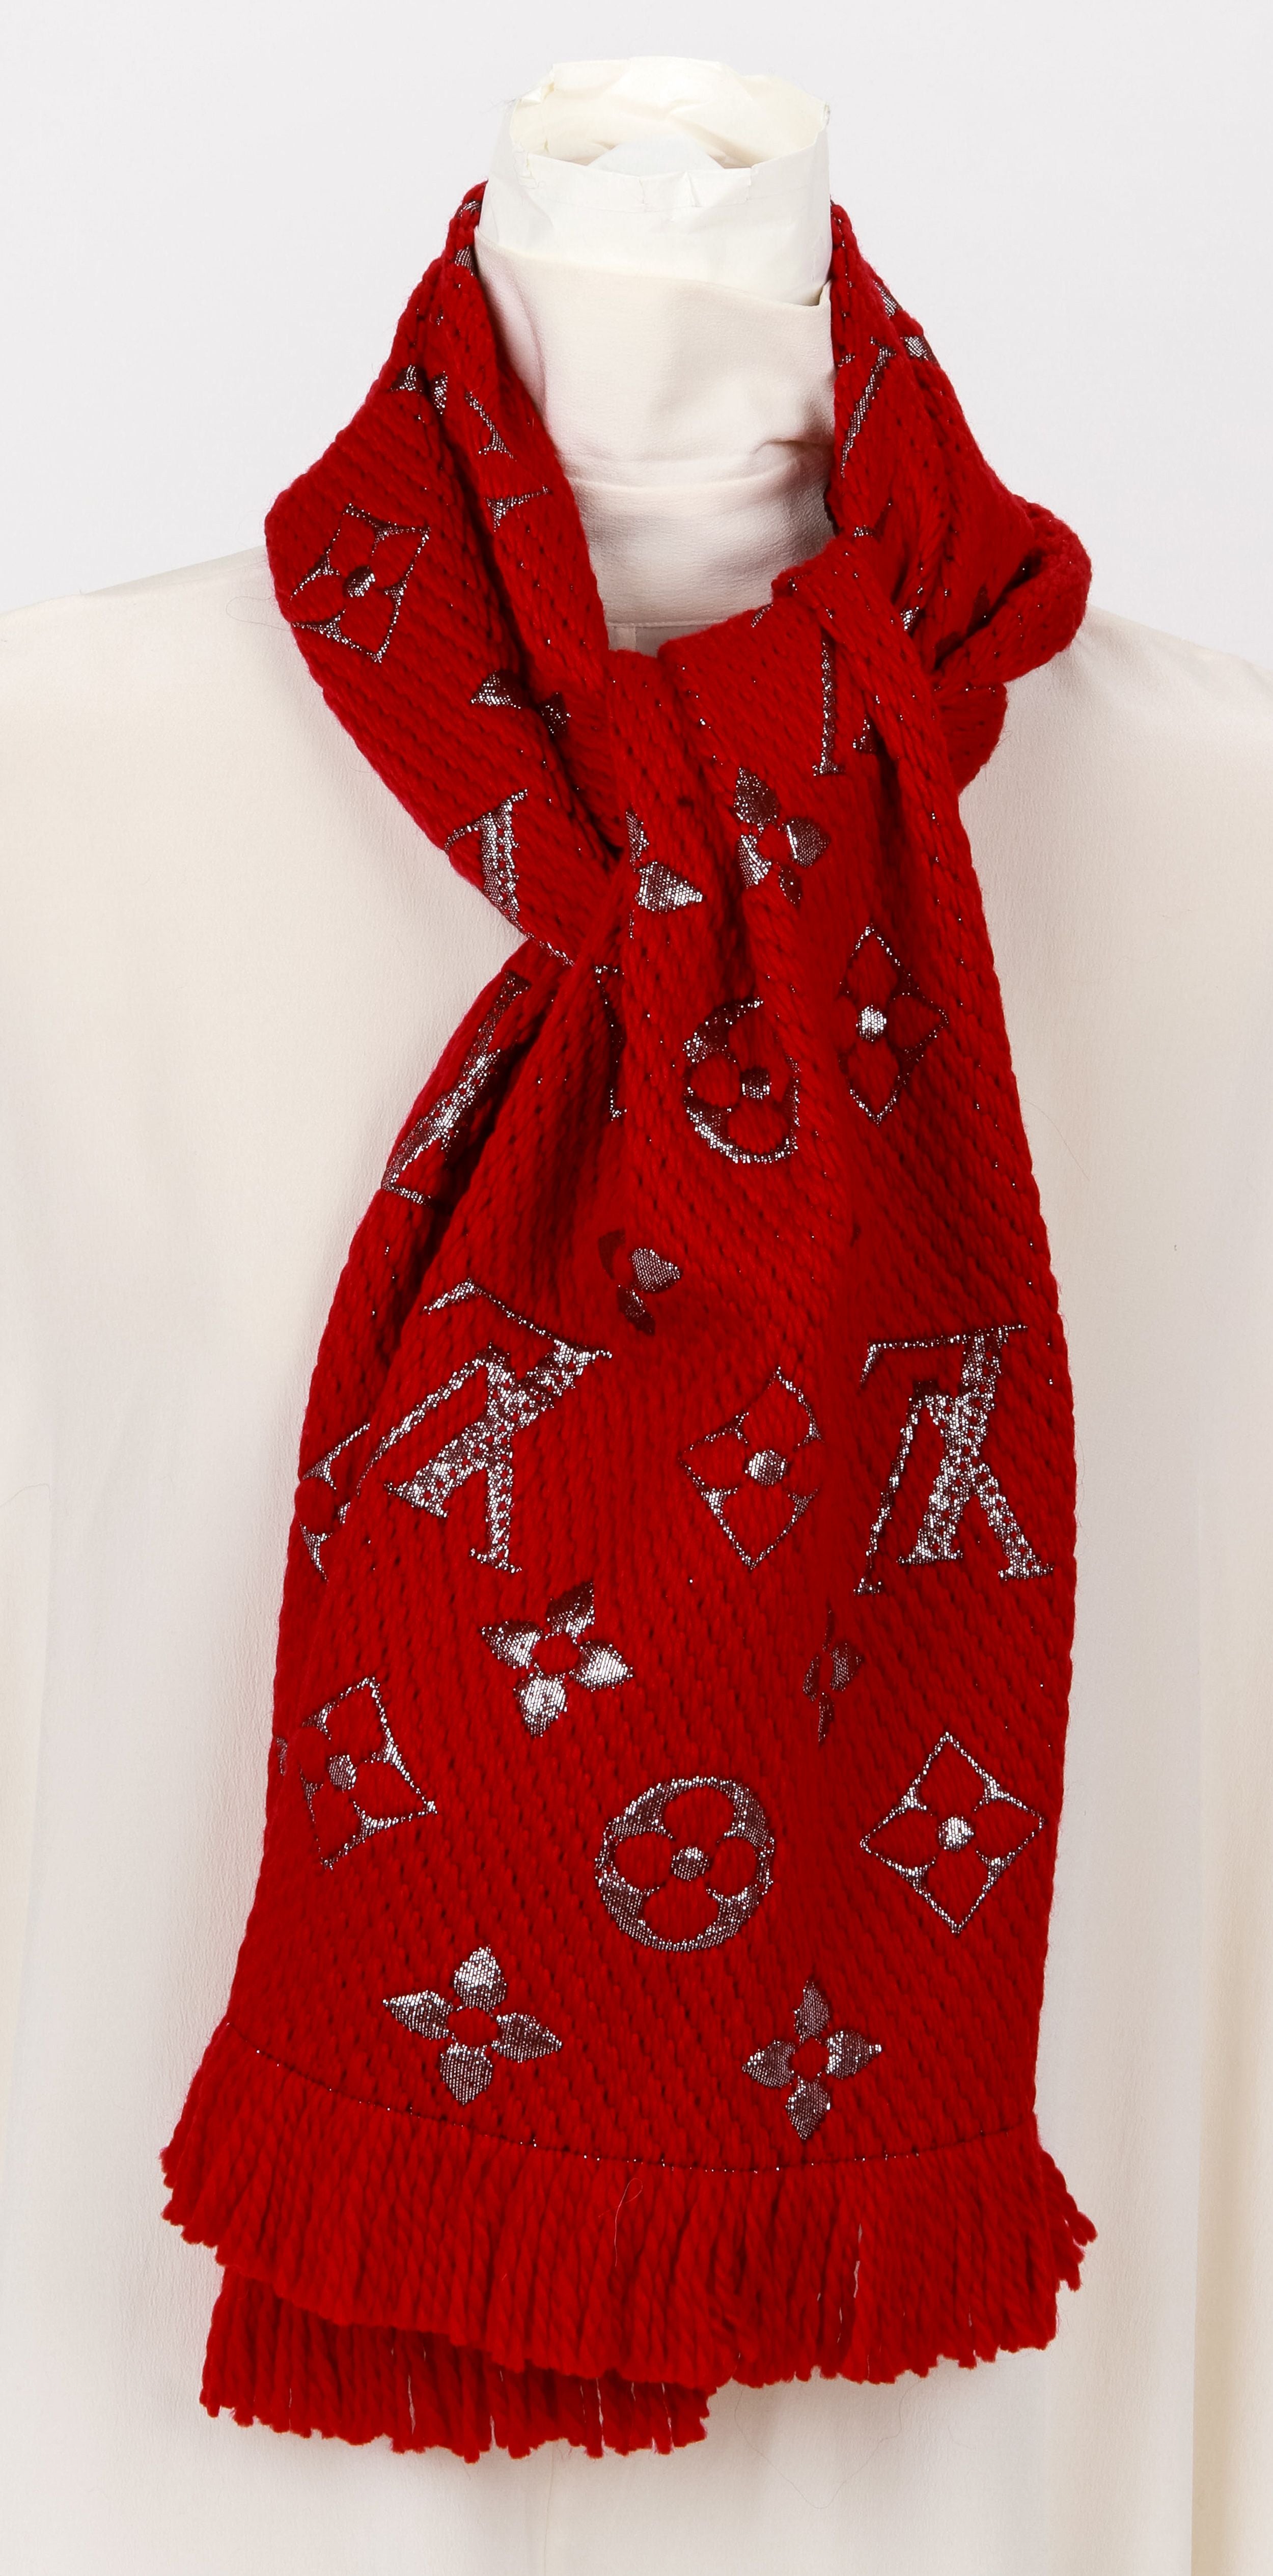 LOUIS VUITTON LV Monogram Classic Shawl Scarf - Red Color